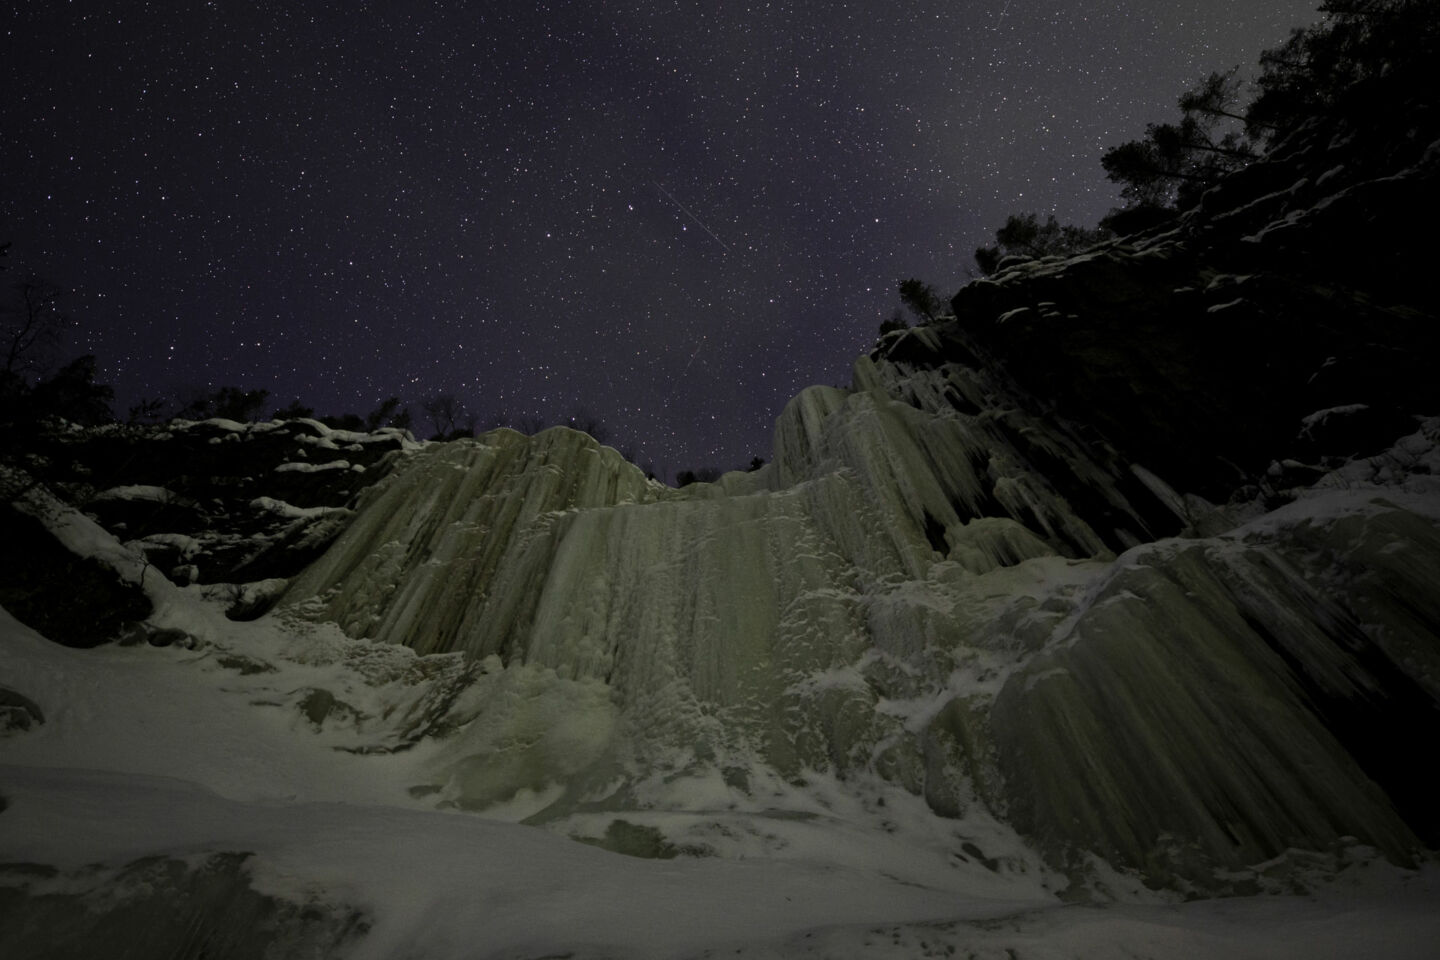 Dark skies and sparkling stars over the frozen waterfall at the Korouoma Canyon in Posio, a Finnish Lapland filming location